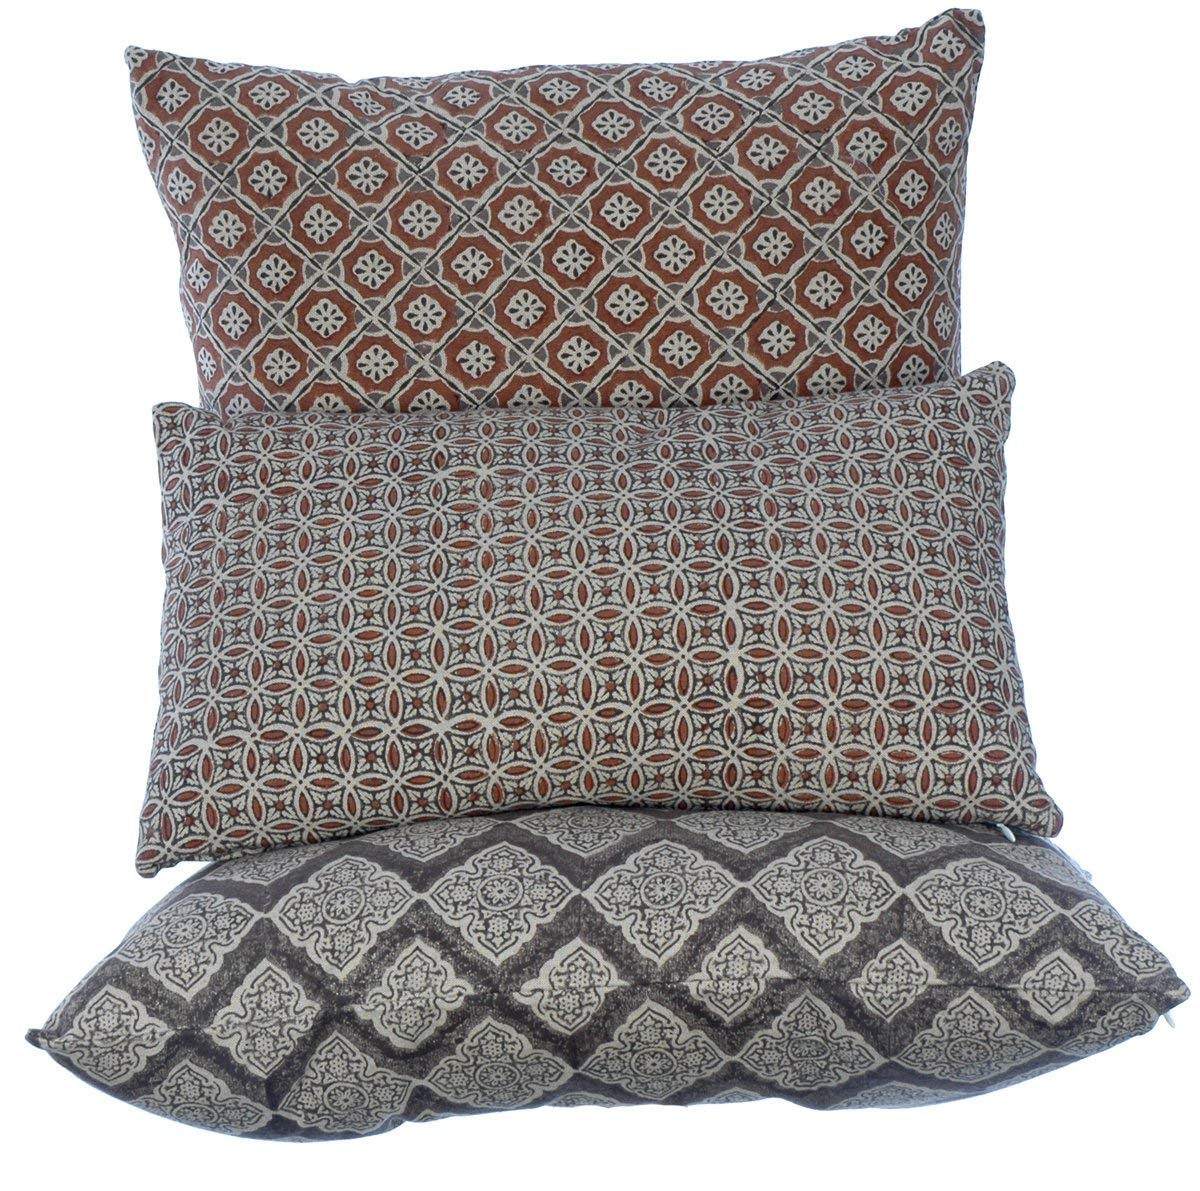 Potager Collection Cotton Cushion in Deep Chocolate Maze 60x60 Hand Block Printed